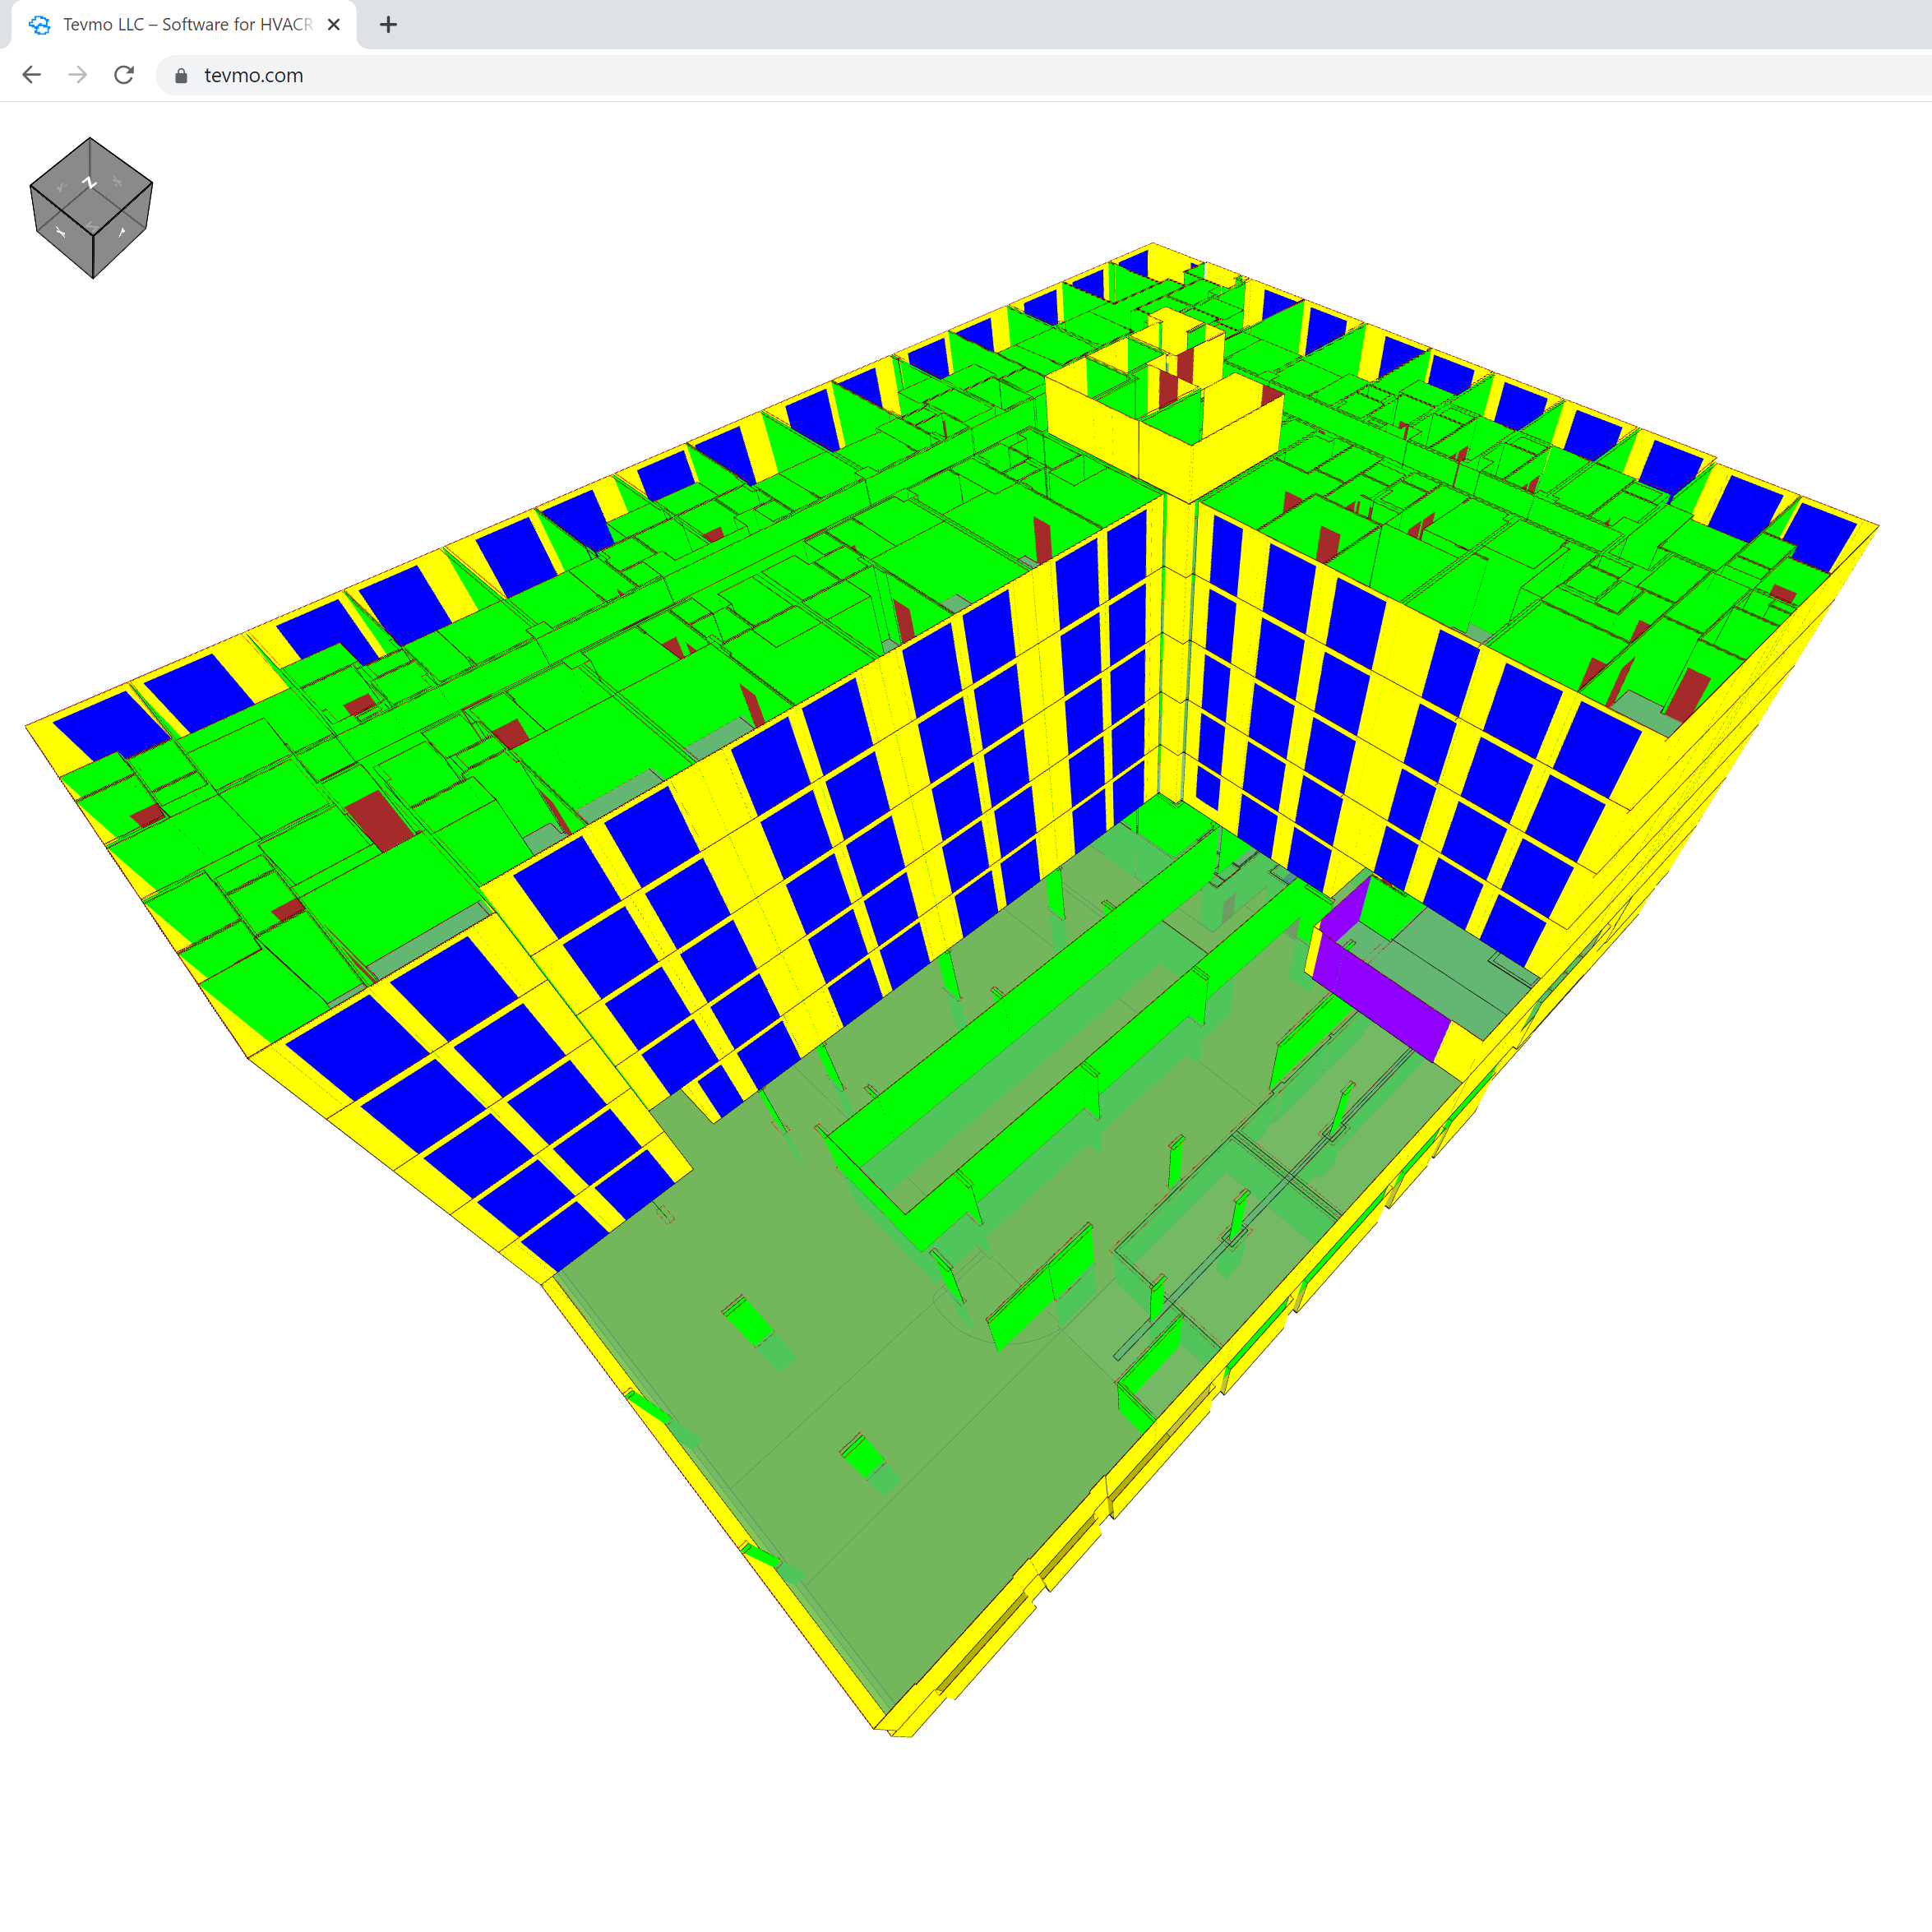 Quickly visualize building model and check that all surfaces were detected correctly.